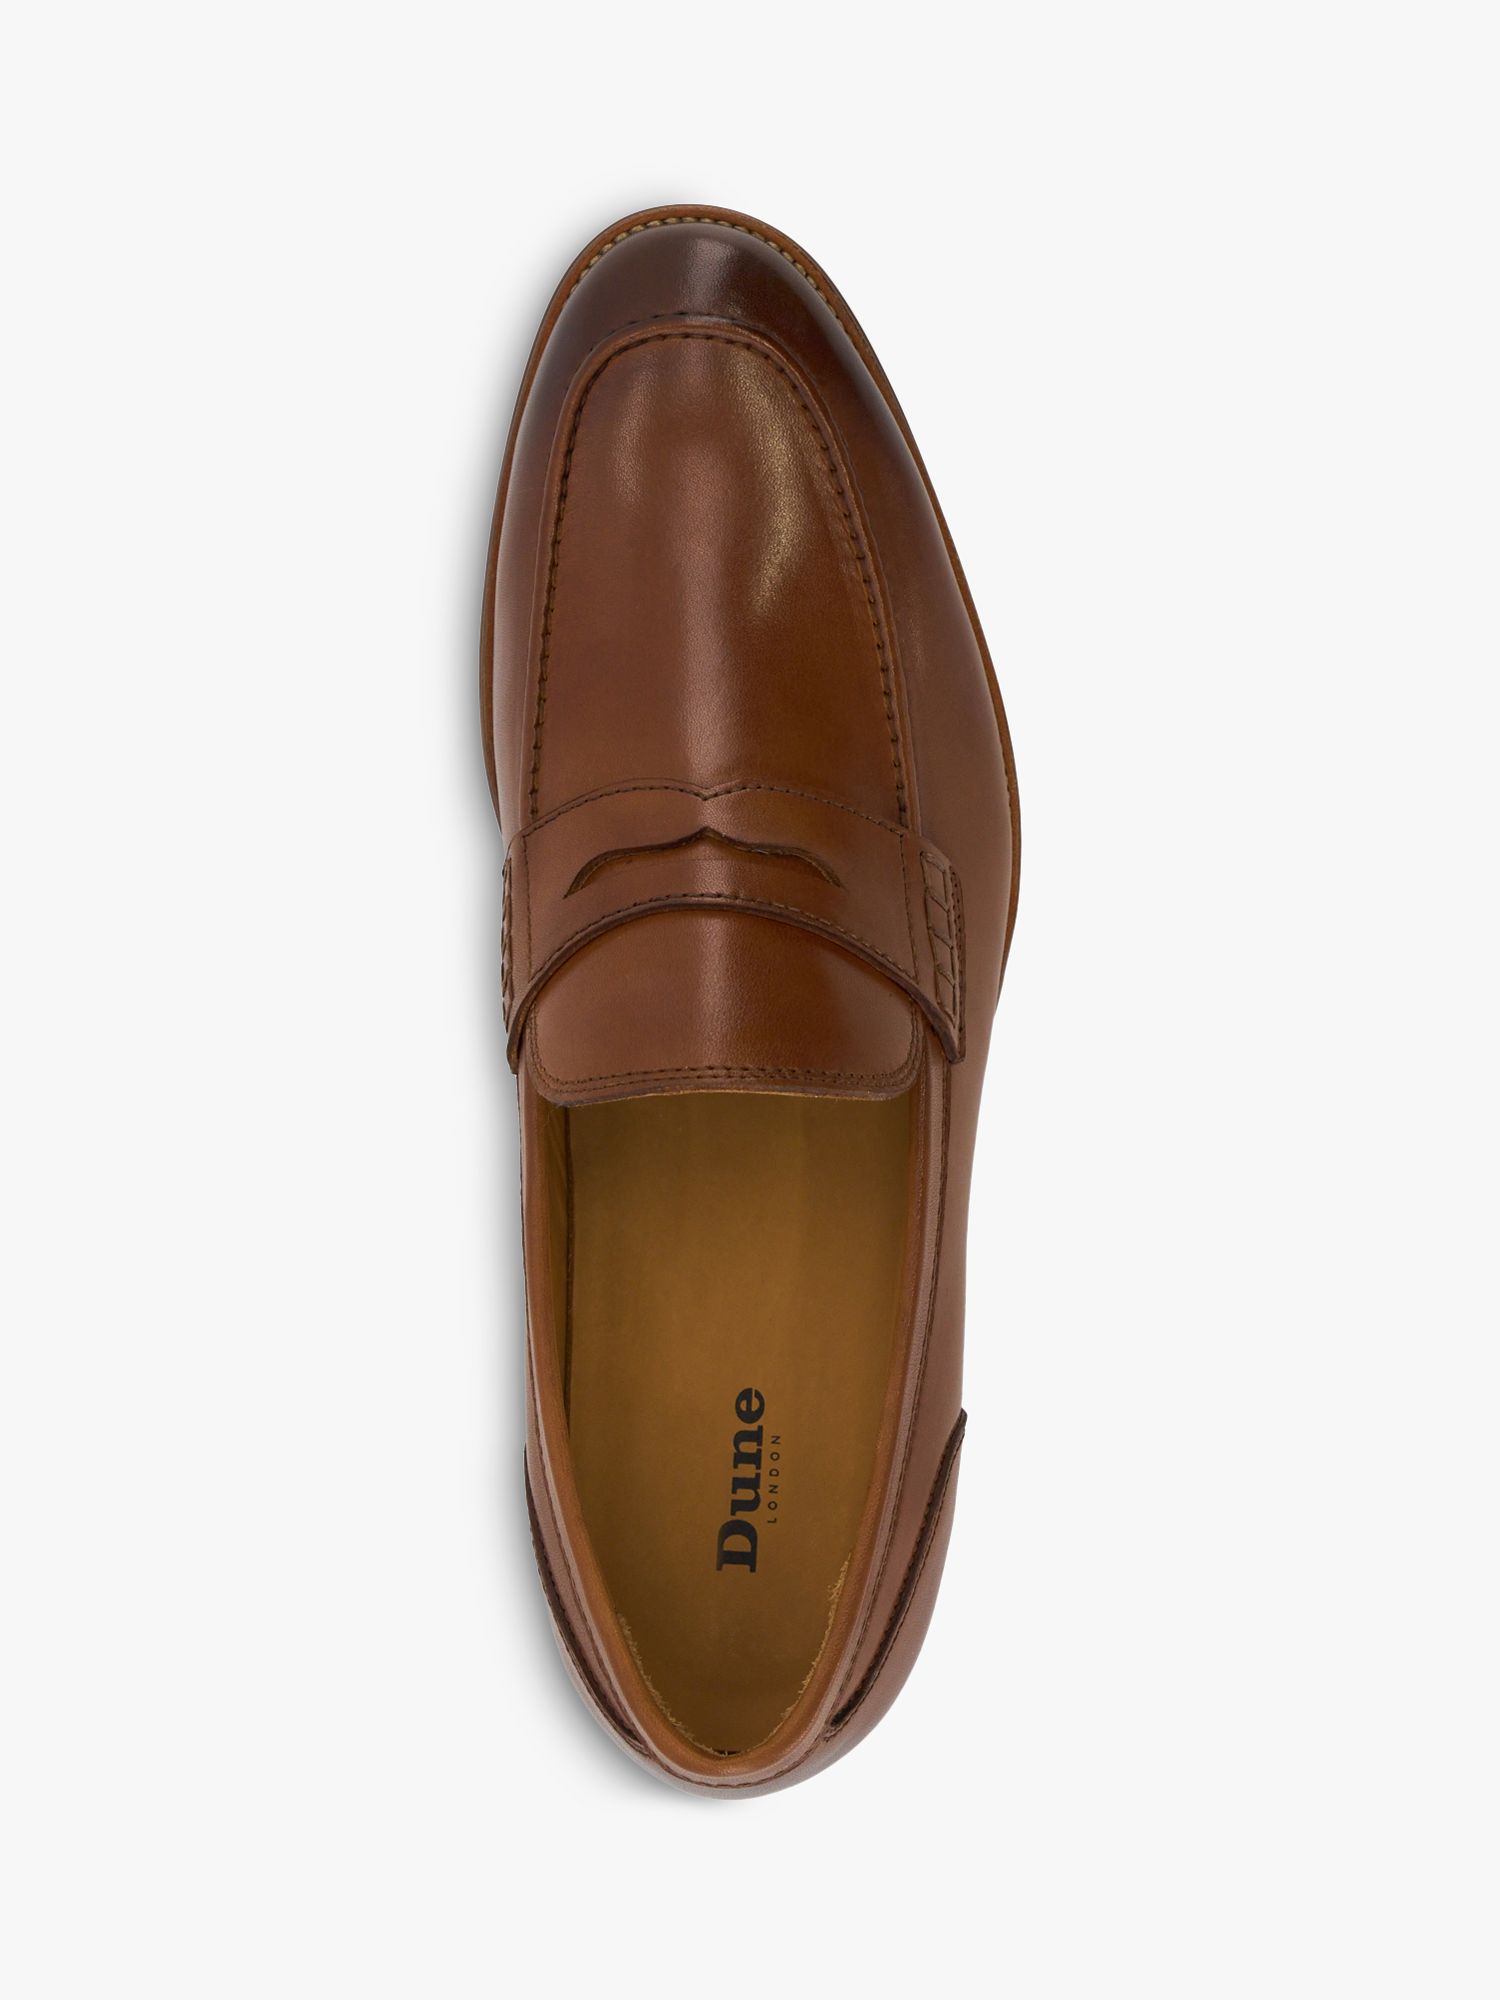 Buy Dune Wide Fit Sulli Leather Penny Loafers, Tan Online at johnlewis.com